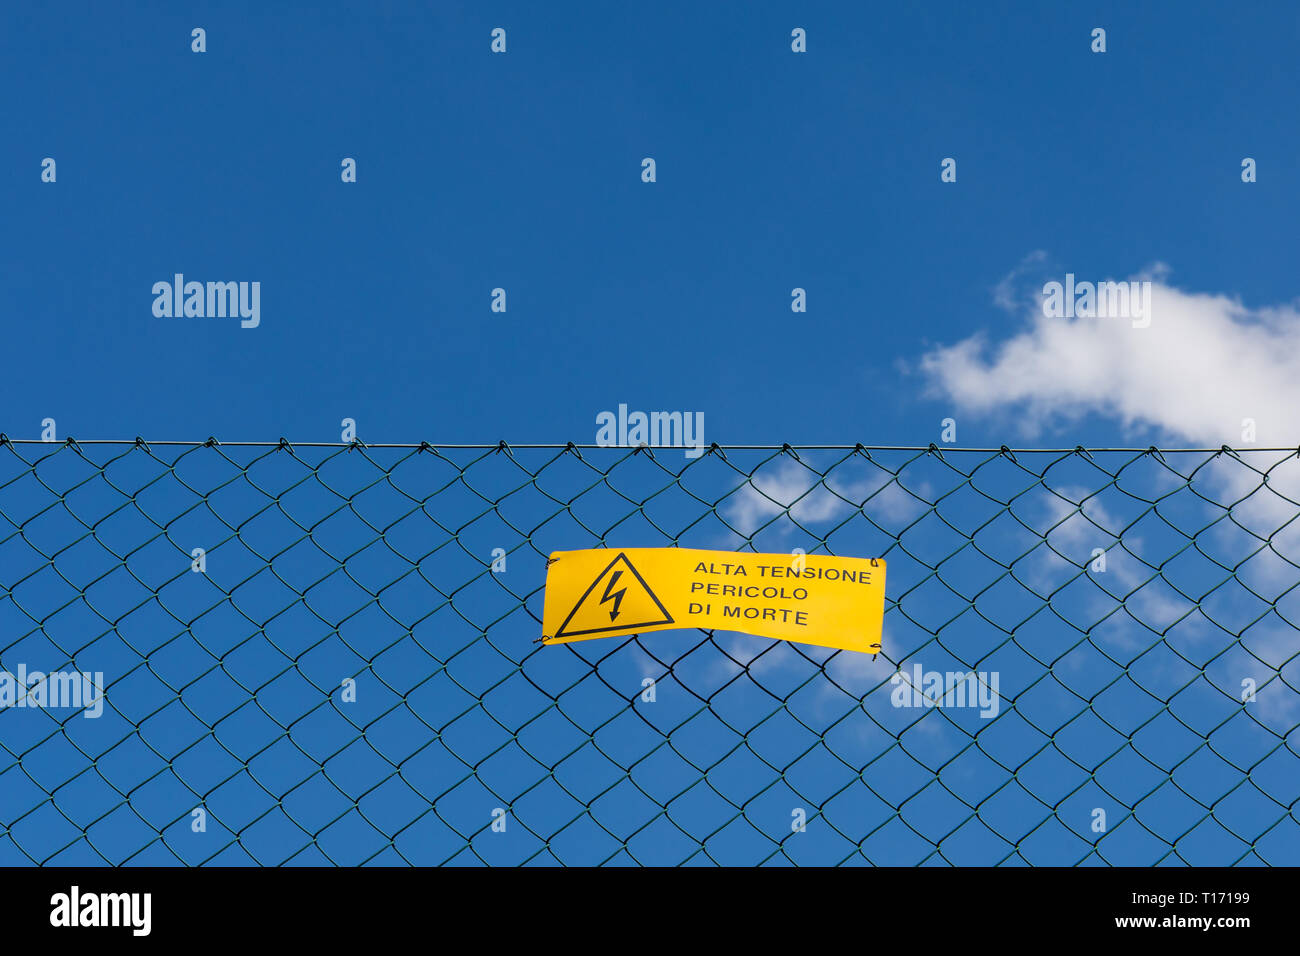 Alta tensione pericolo di morte (High voltage Danger of death) warning sign on a wire fence in Italy Stock Photo